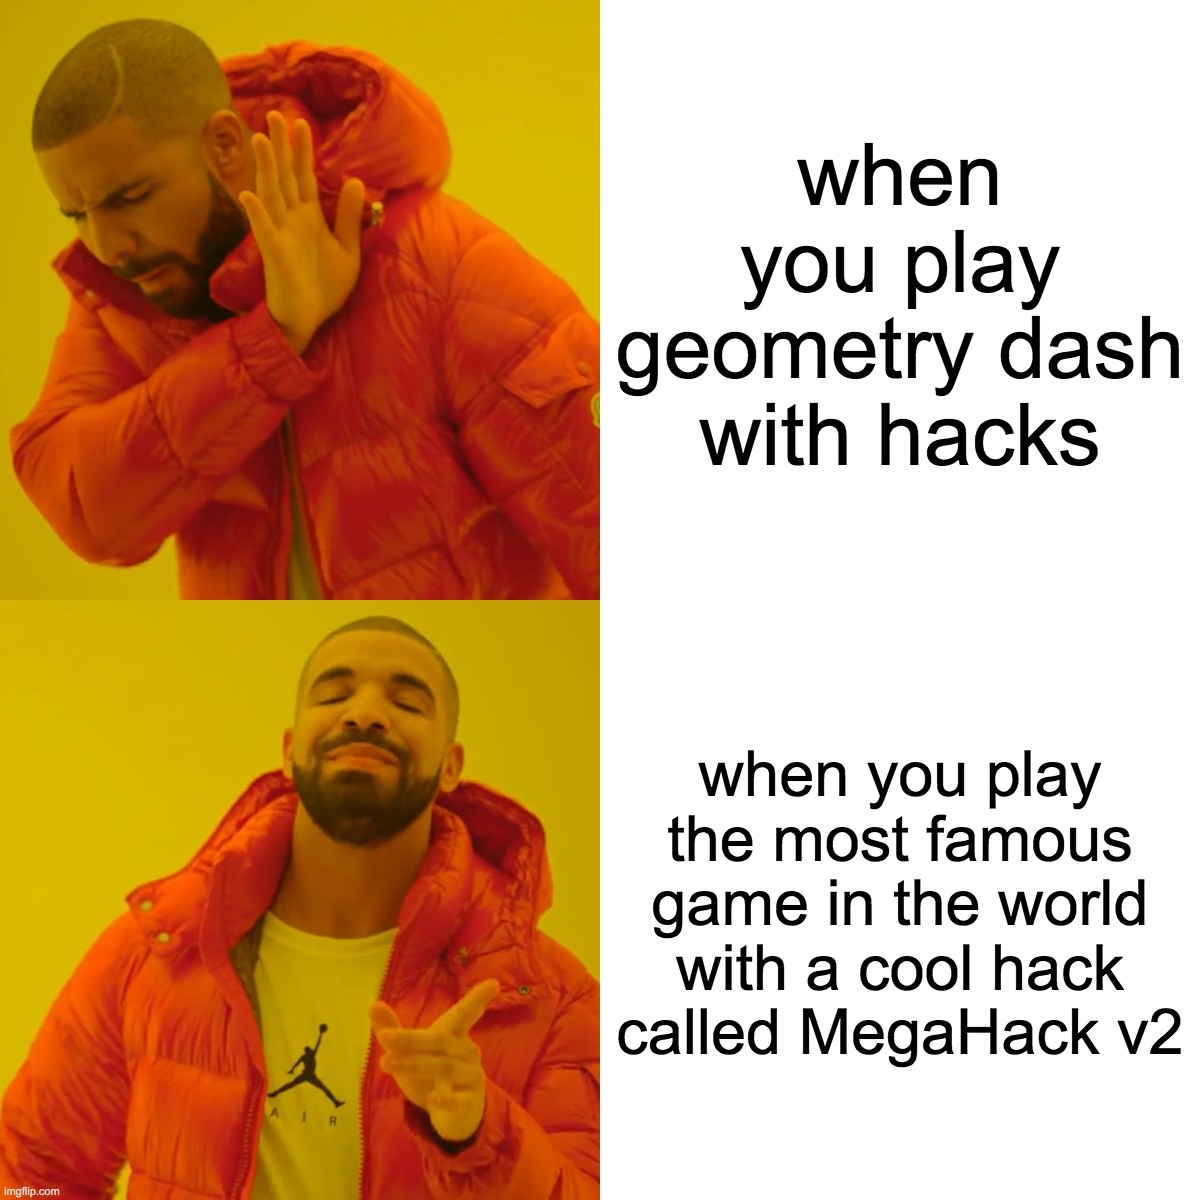 Drake Hotline Bling Meme | when you play geometry dash with hacks; when you play the most famous game in the world with a cool hack called MegaHack v2 | image tagged in memes,drake hotline bling | made w/ Imgflip meme maker